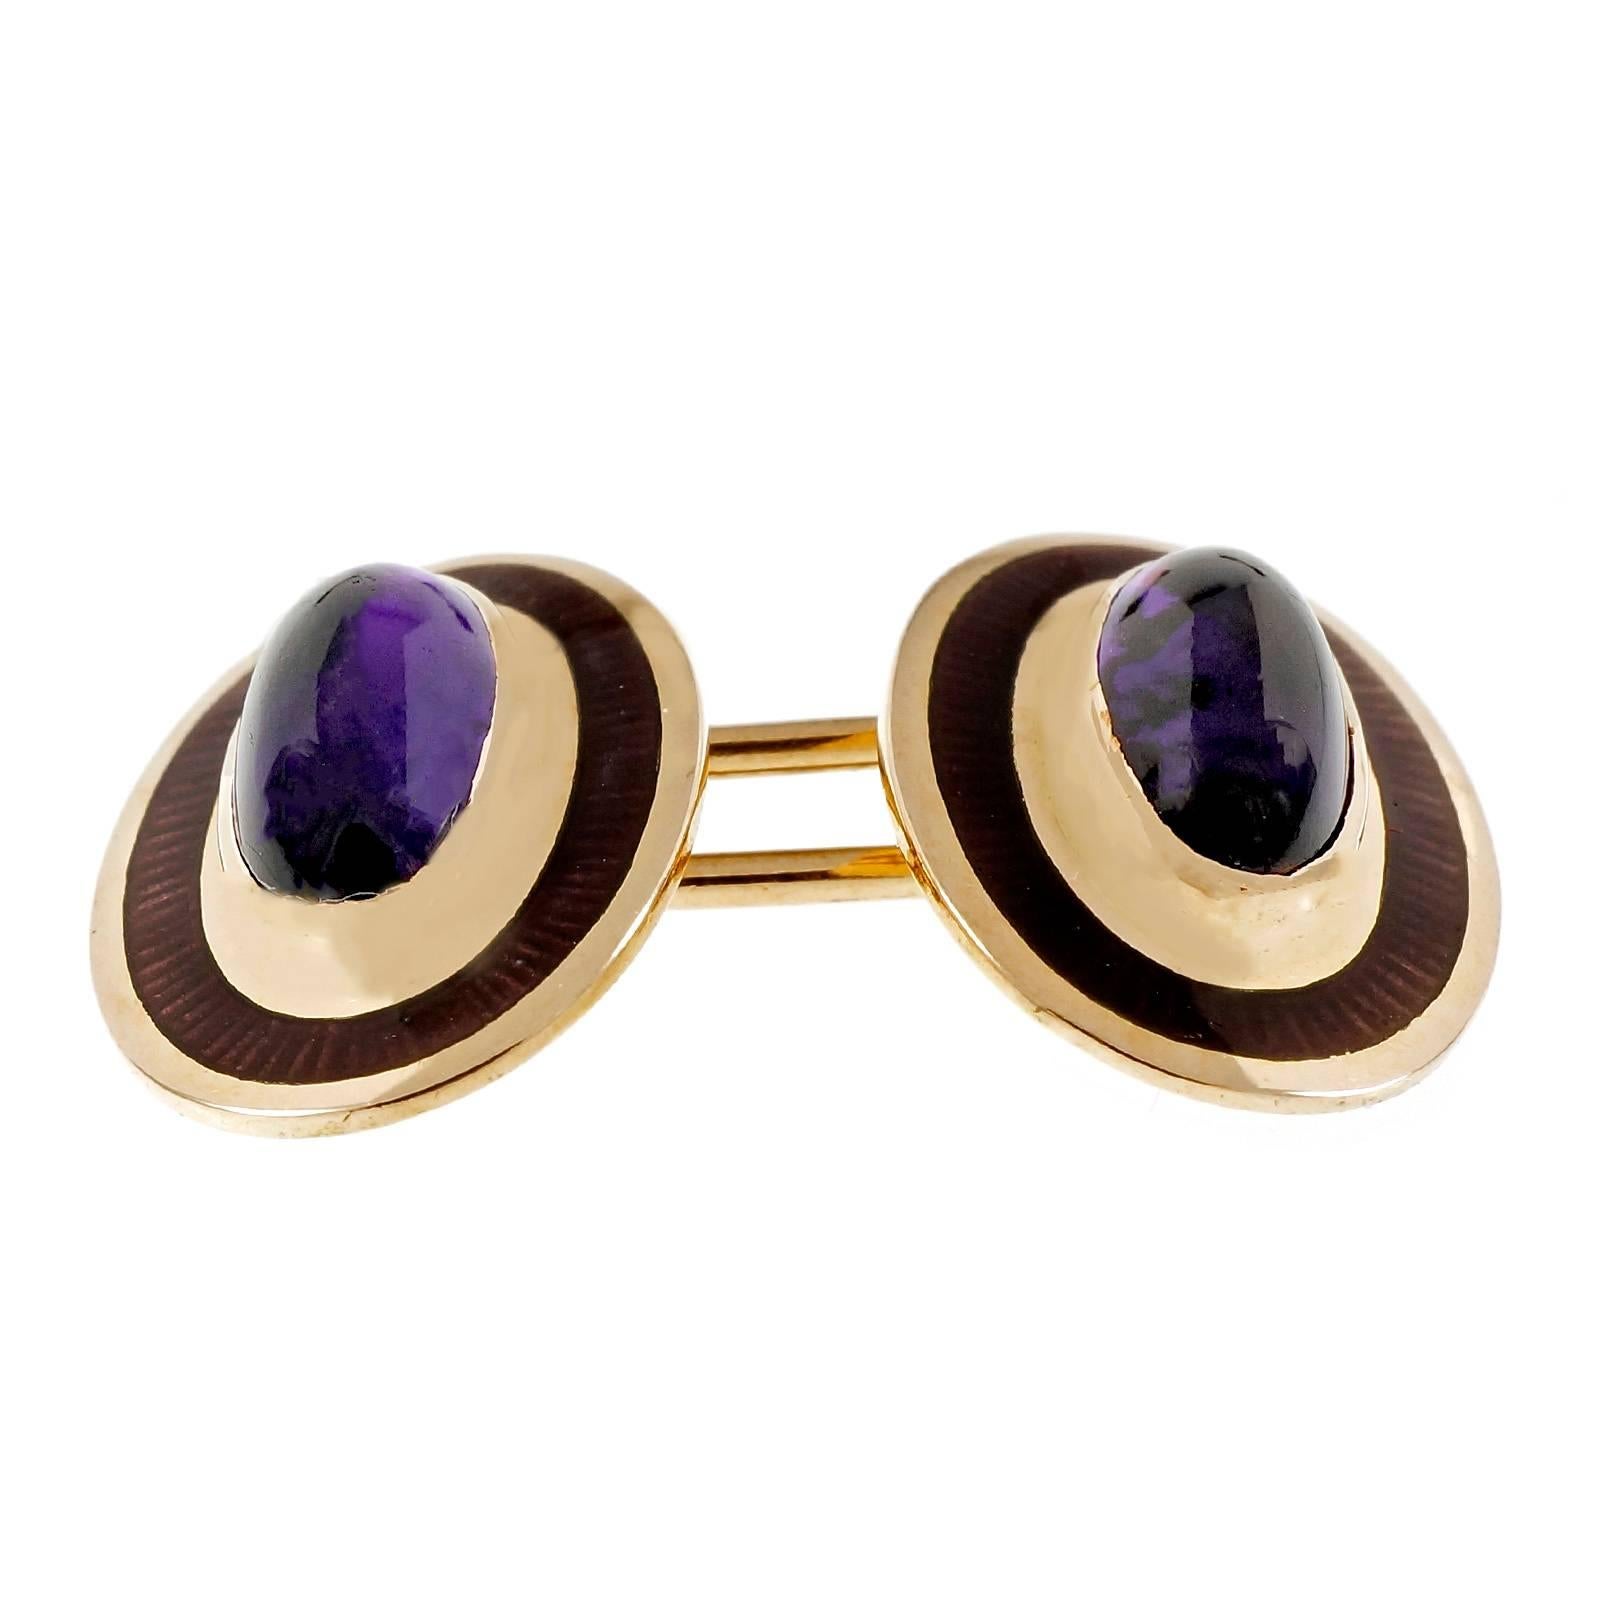 Victorian 1900 double sided 14k yellow gold cuff links with fine genuine natural cabochon Amethyst and purple enamel rim.

4 oval cabochon purple Amethyst, 9.46 x 4.43mm
14k yellow gold
Tested and stamped: 14k
Hallmark: D
9.4 grams
Top to bottom: